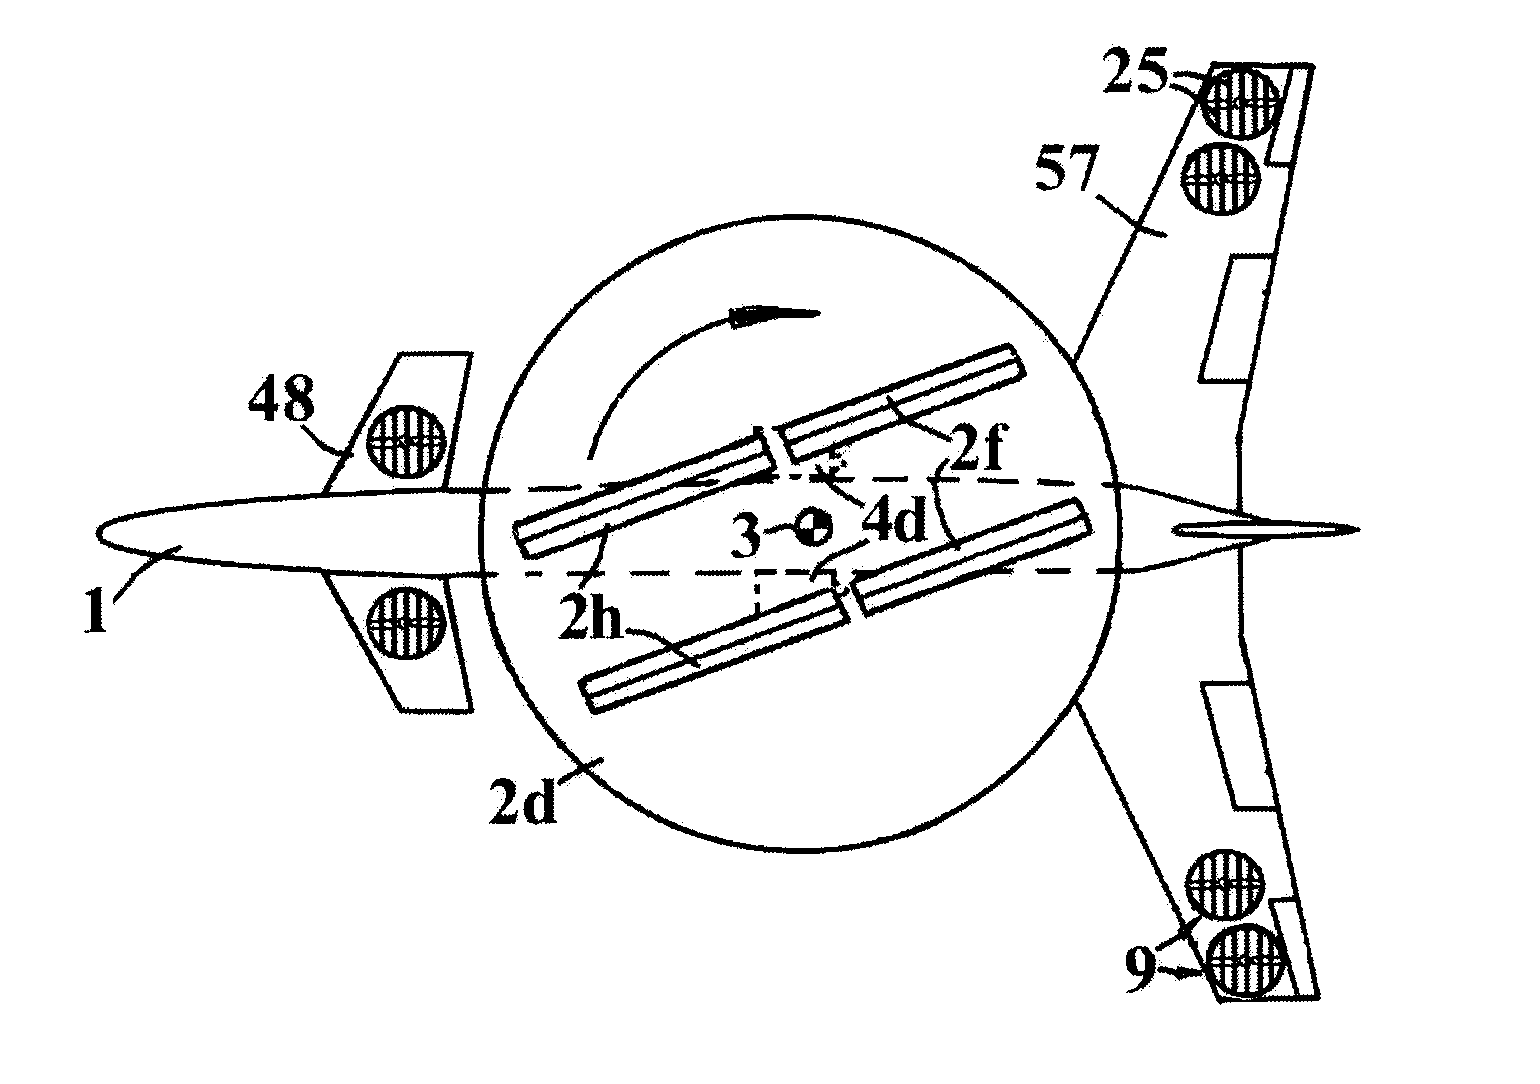 Lift Propulsion and Stabilizing System and Procedure For Vertical Take-Off and Landing Aircraft